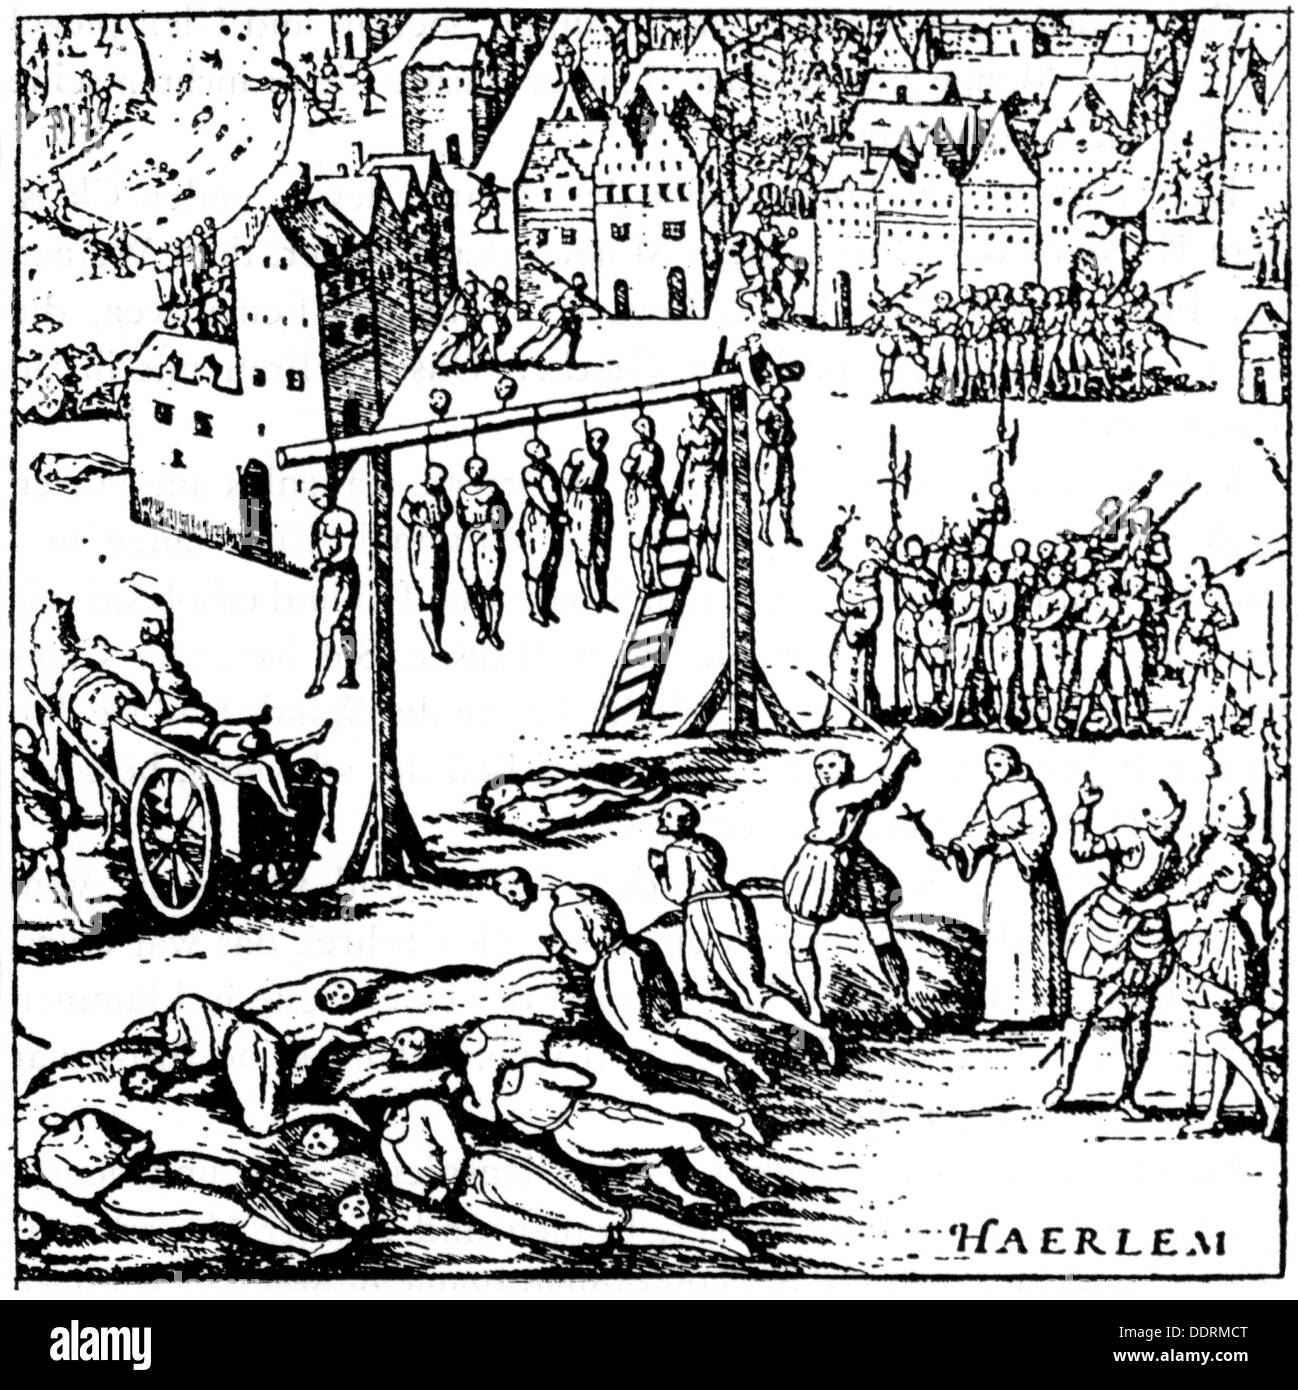 justice-inquisition-mass-executions-by-the-spanish-inquisition-haarlem-DDRMCT.jpg